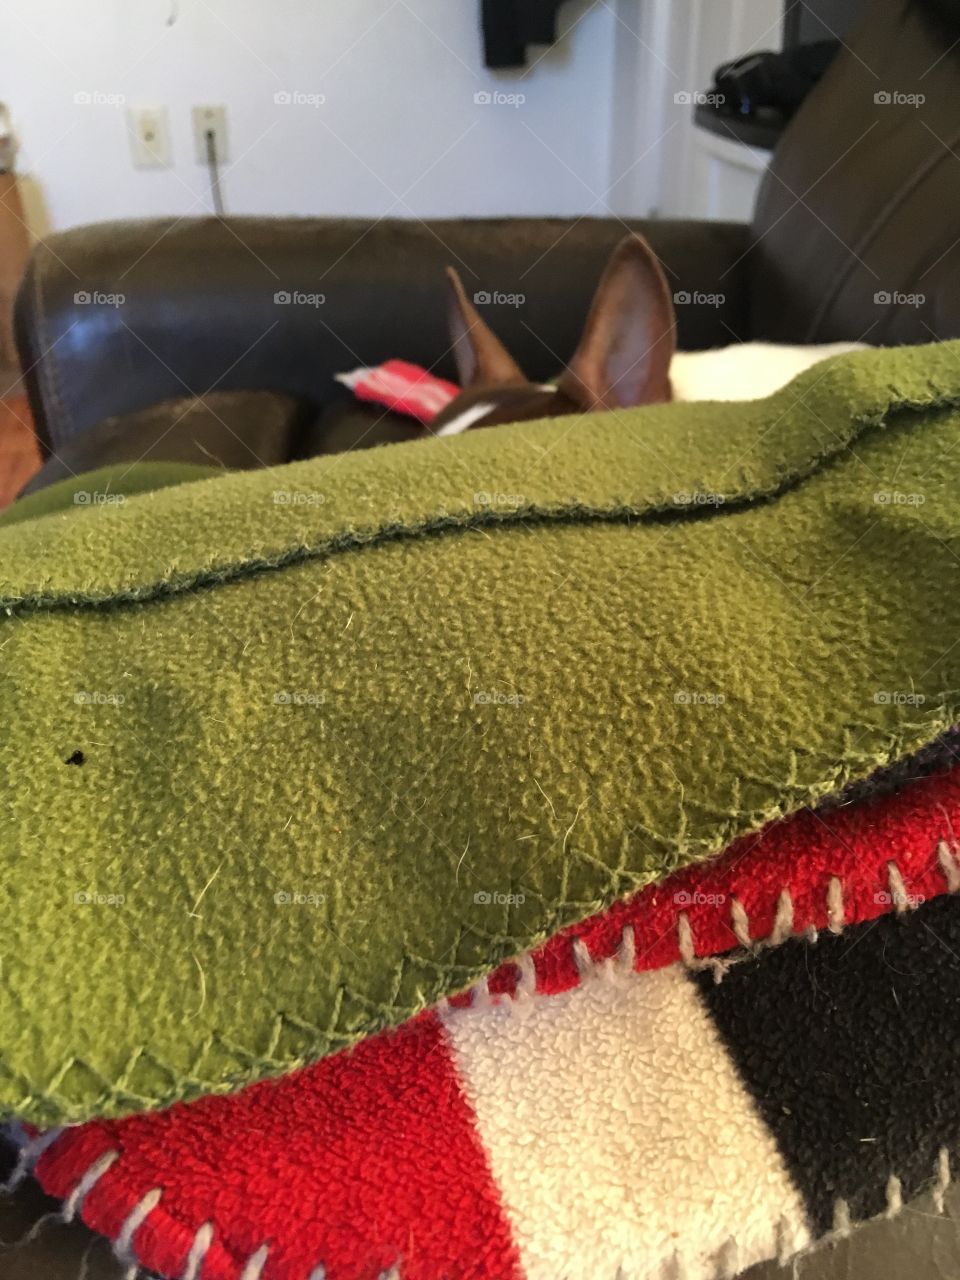 Look! I see ears.who’s hiding over there? Gizmo enjoying his fresh clean blankets.